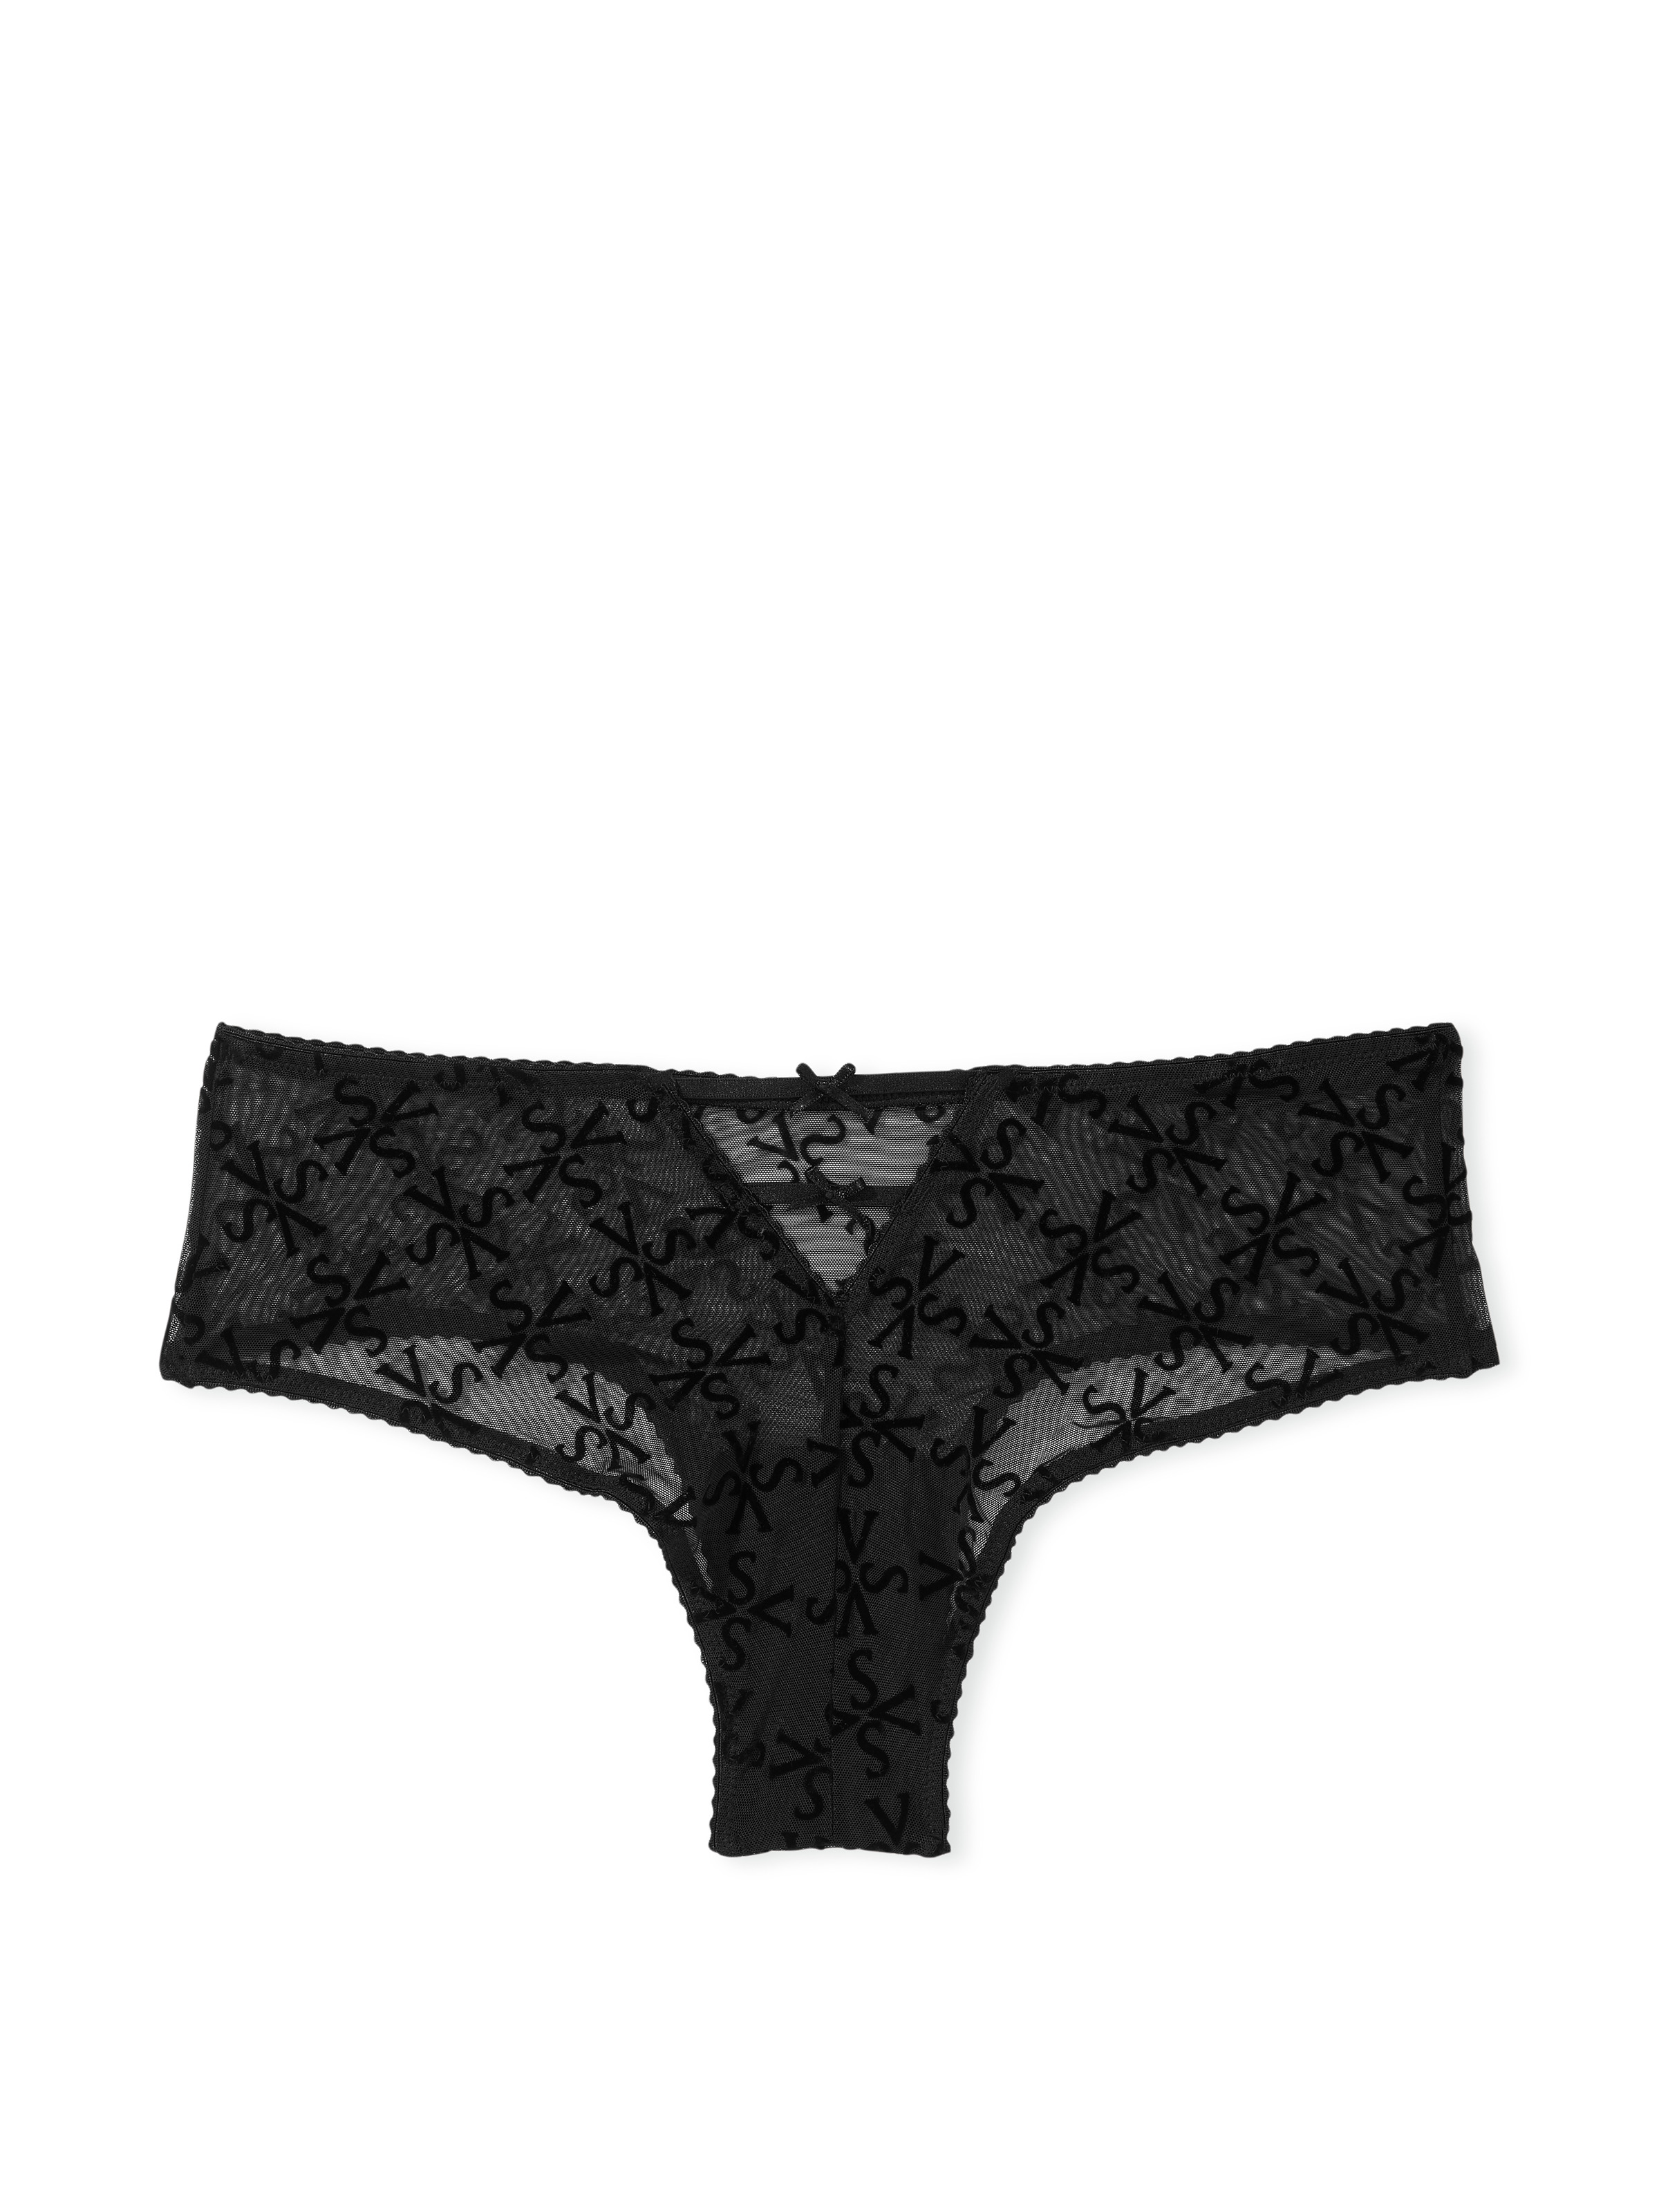 Logo Mesh Cheeky Panty image number null